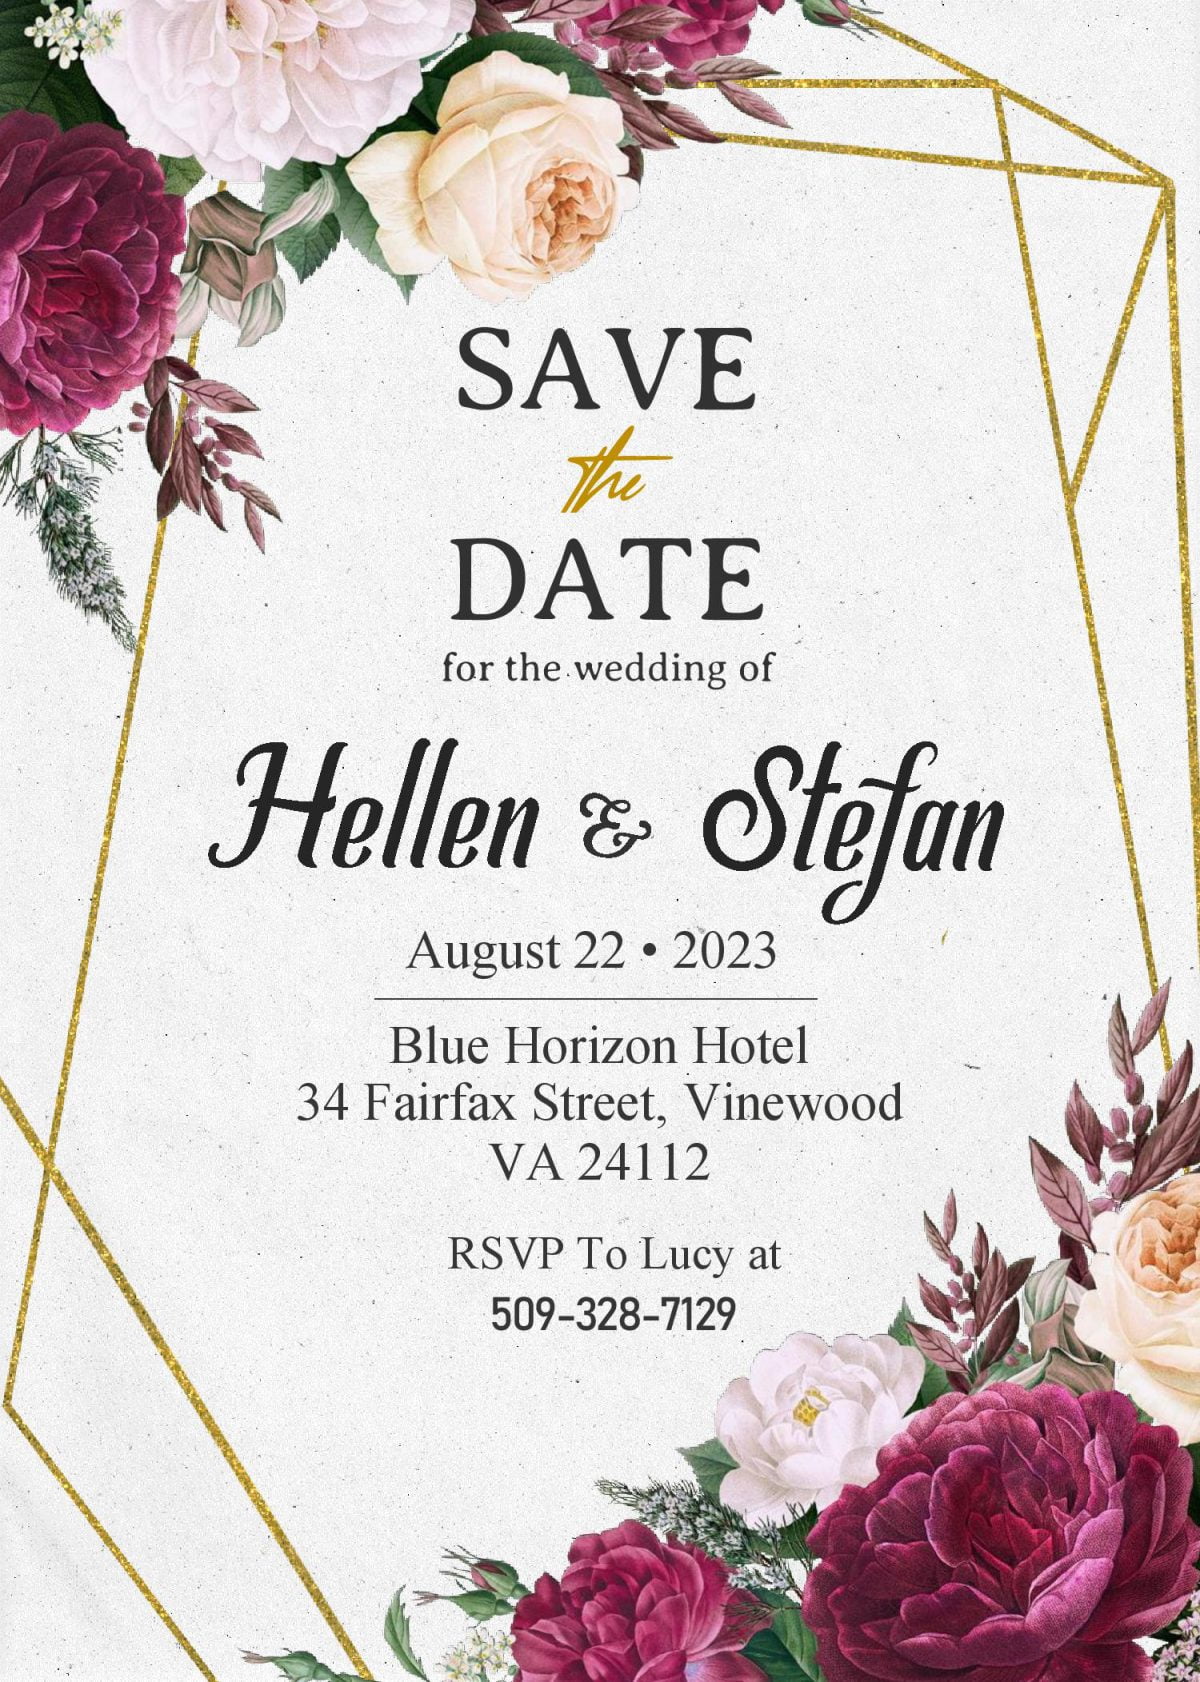 Save The Date Invitation Templates - Editable With MS Word and has burgundy roses